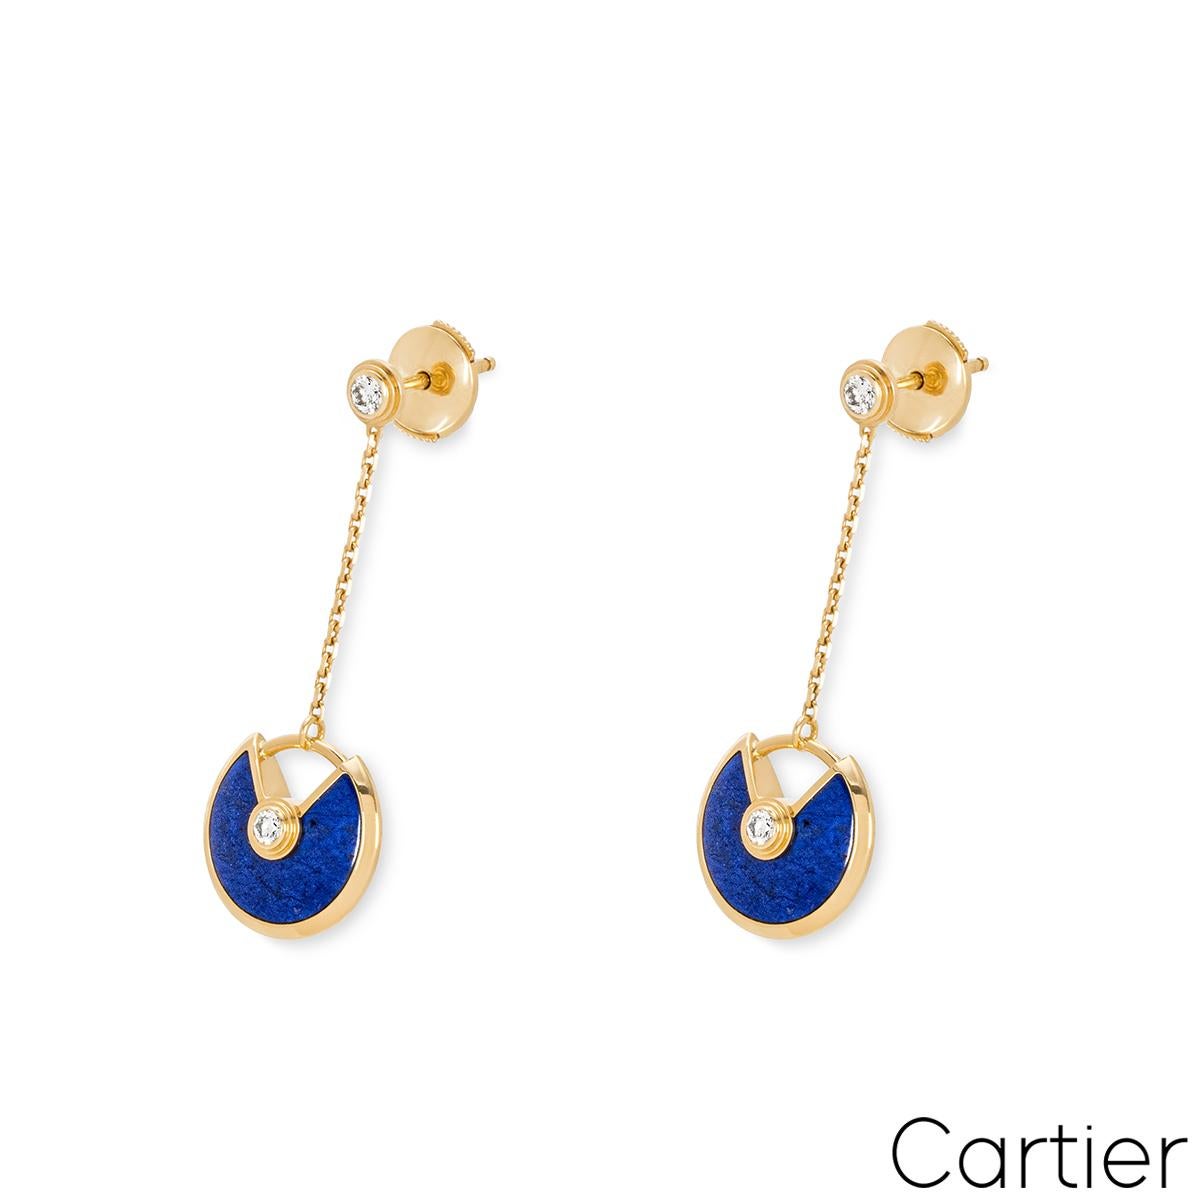 A pair of 18k yellow gold lapis lazulli and diamond earrings by Cartier from the Amulette de Cartier collection. The earrings are composed of a single round brilliant cut diamond, suspending a lapis lazuli talisman, with another round brilliant cut